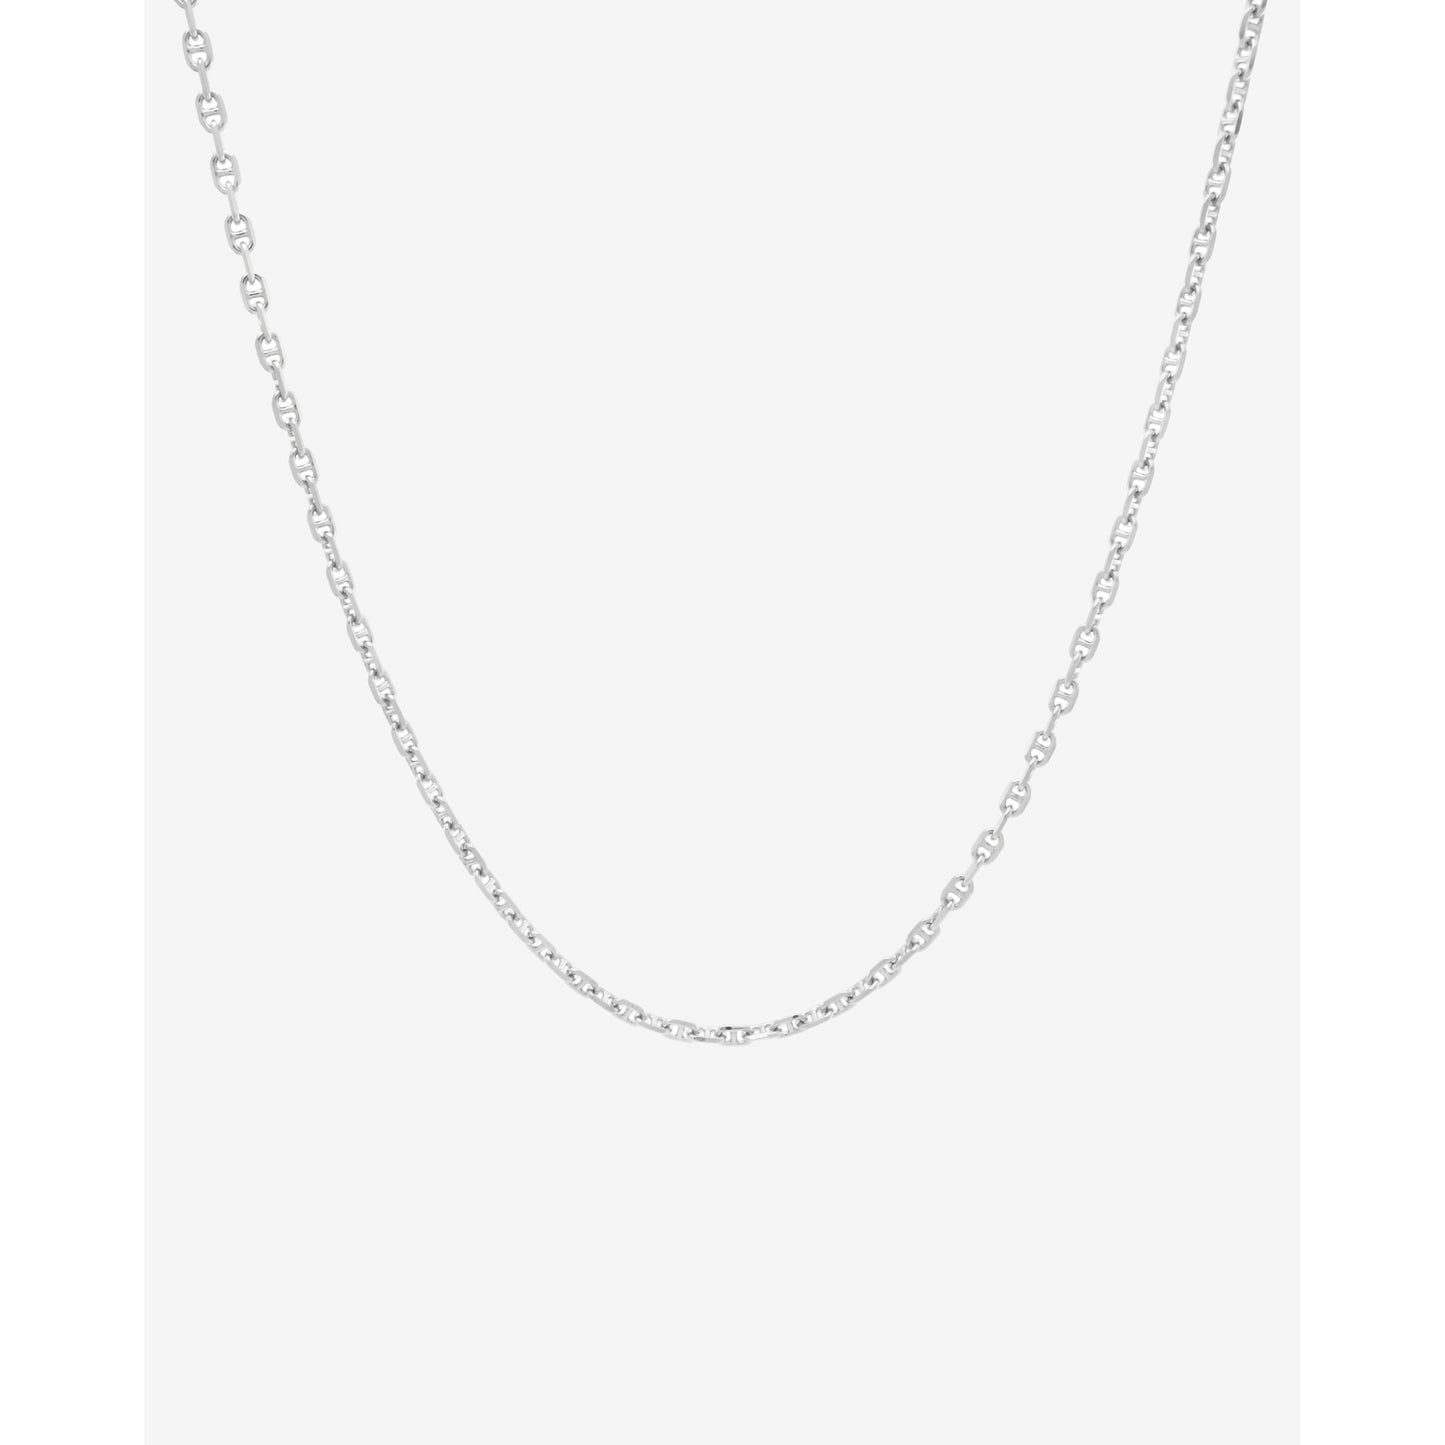 Chunky Anchor Long Chain Necklace in Silver